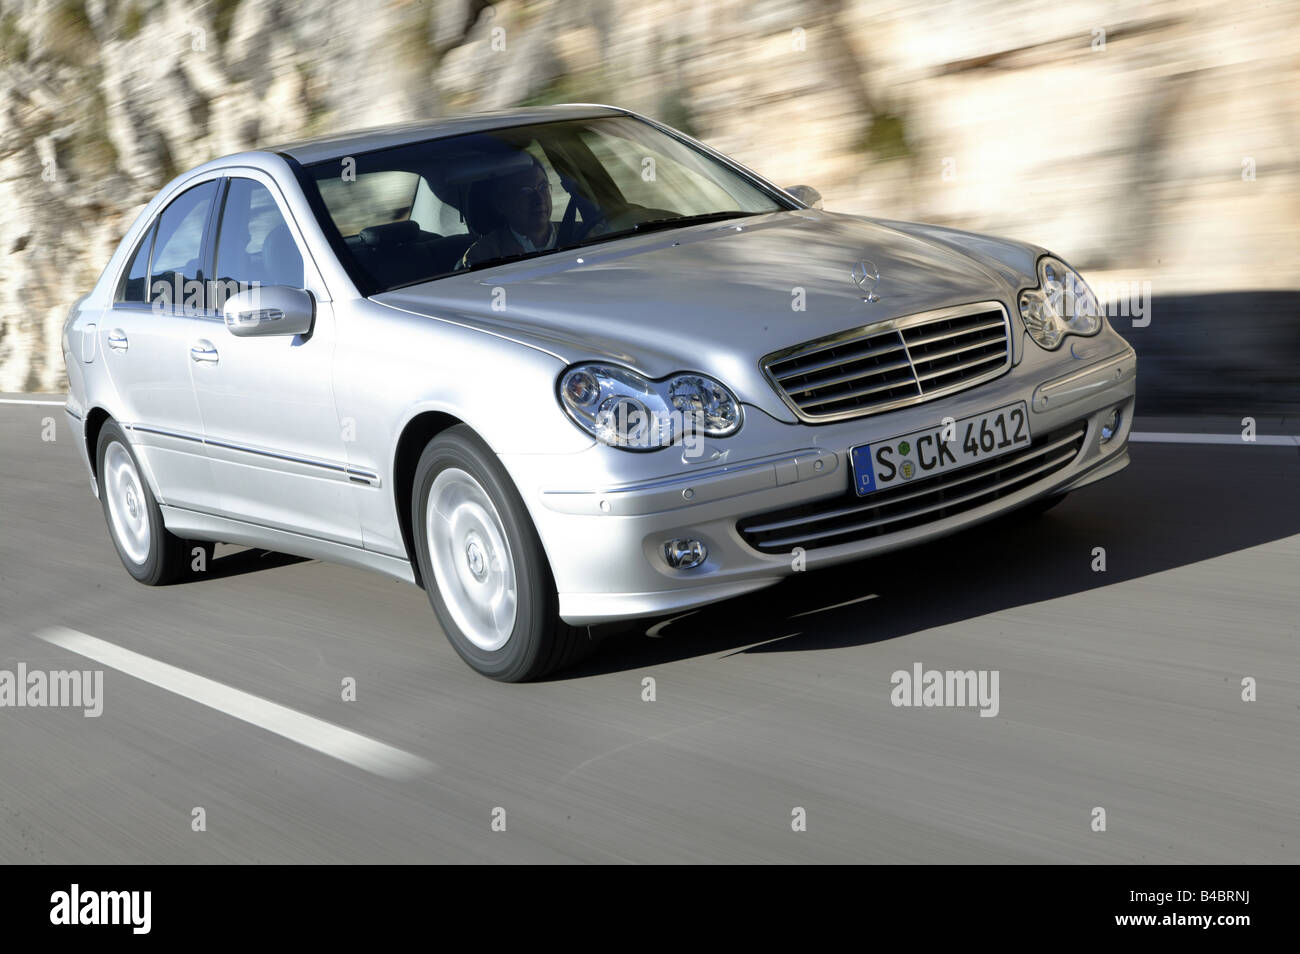 Car, Mercedes-Benz C 230 compressor Elegance, Limousine, medium class, model  year 2004-, silver, 193 PS, driving, diagonal from Stock Photo - Alamy